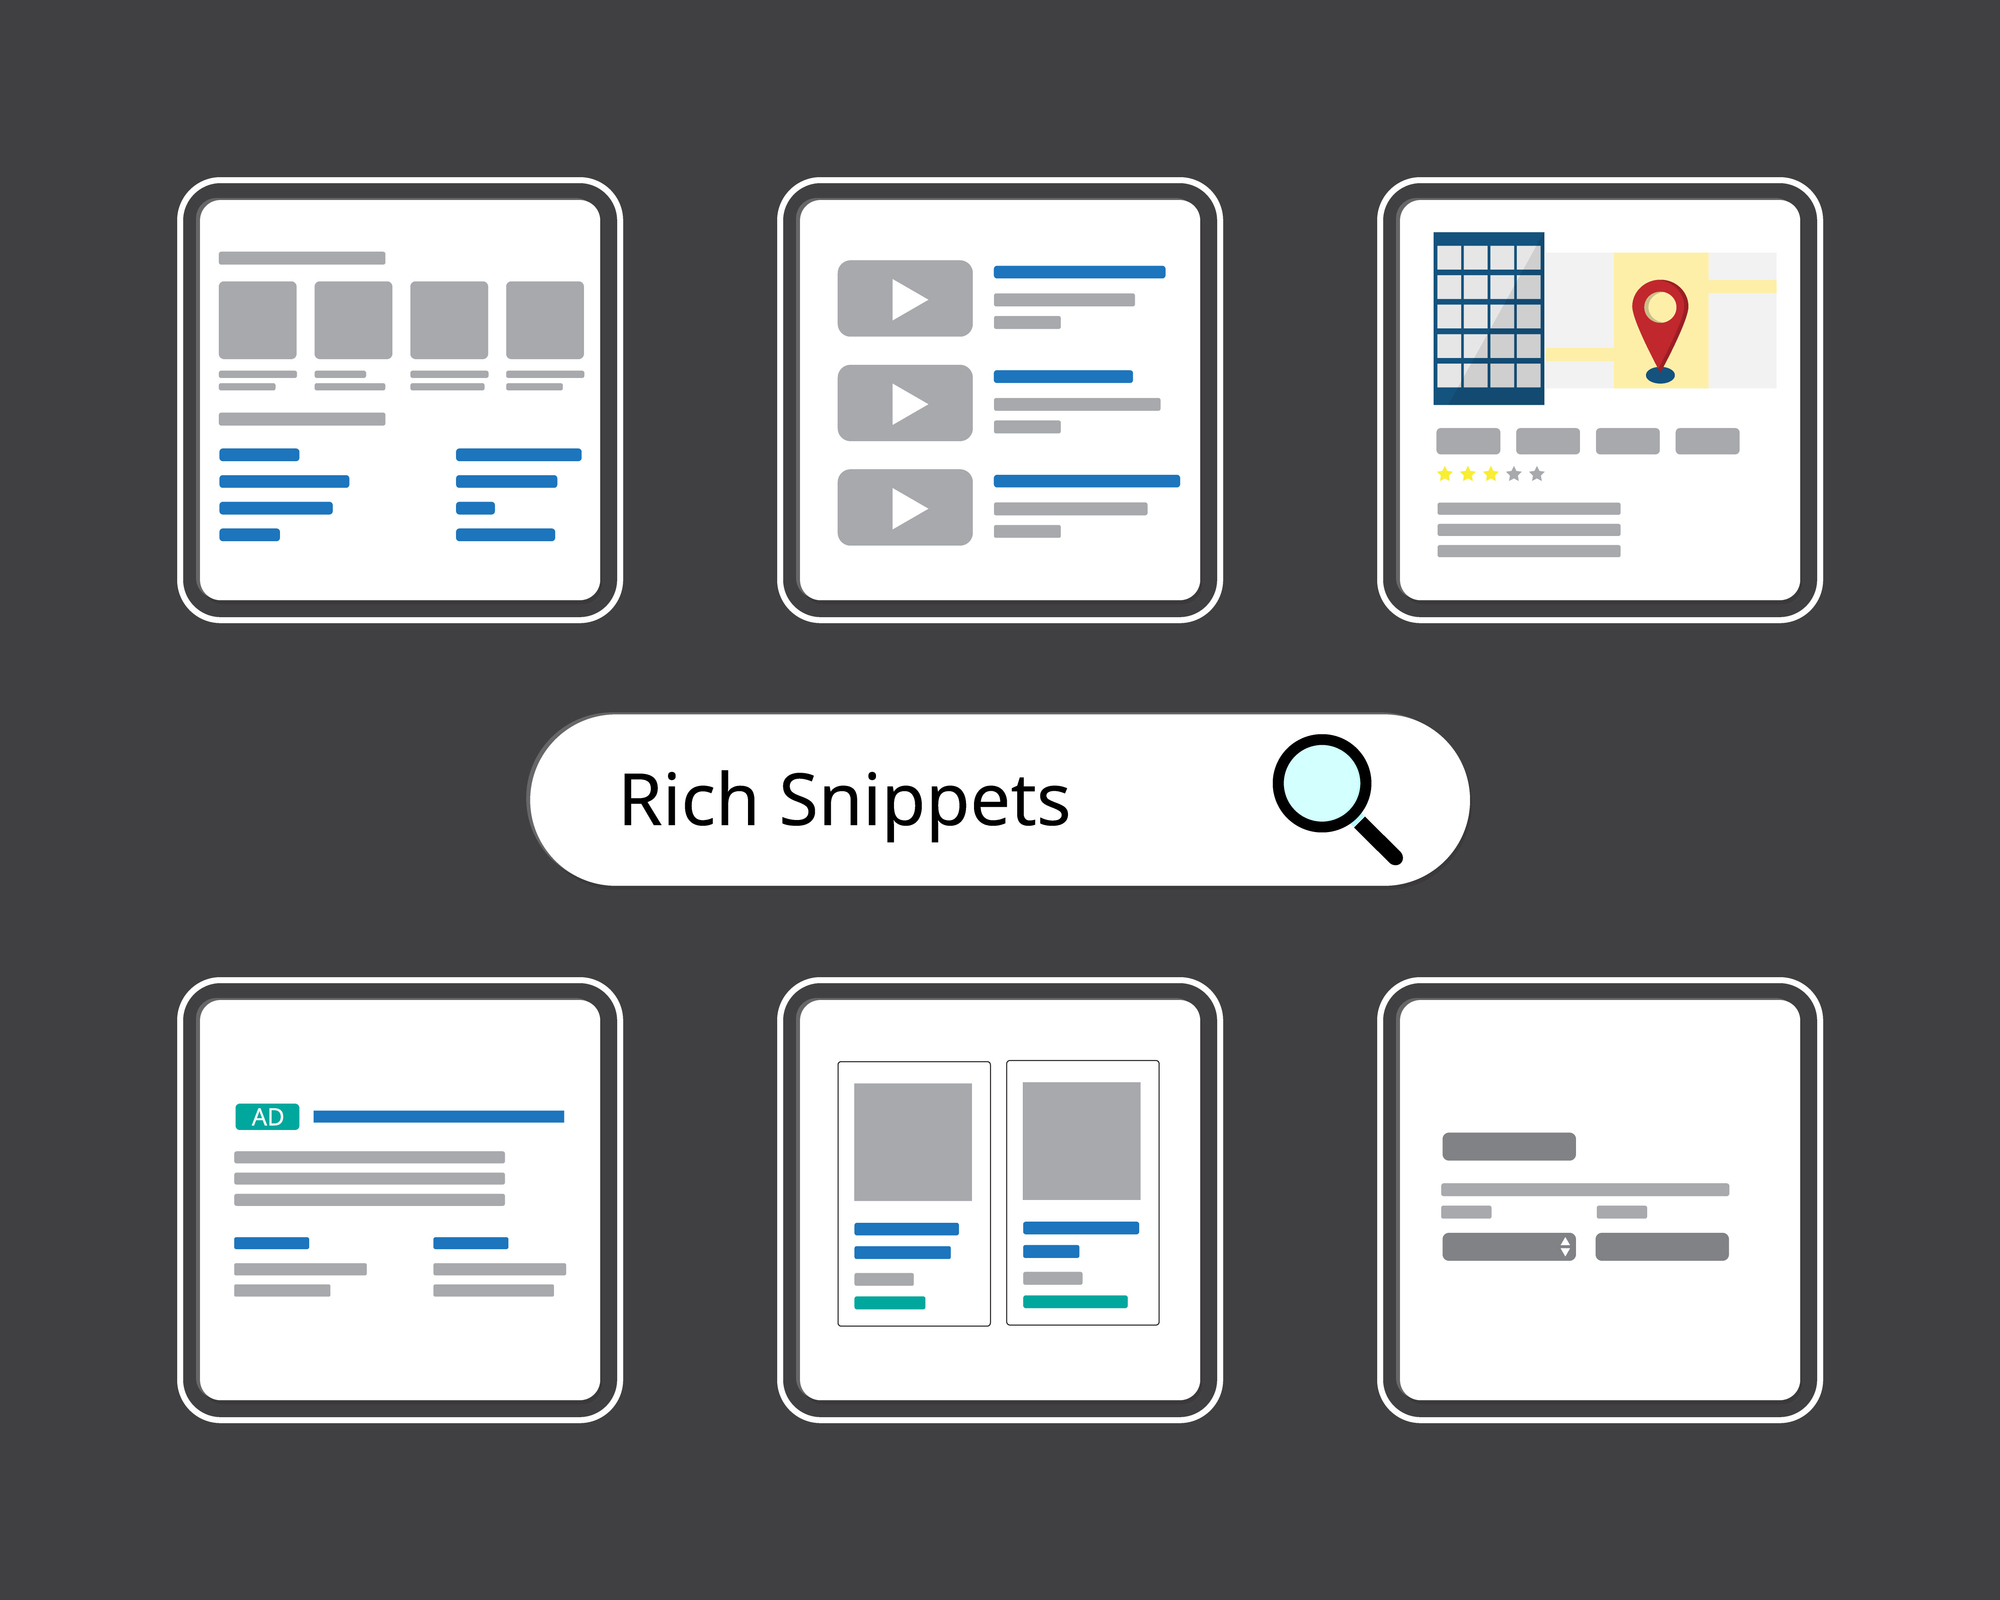 sorts of rich snippets